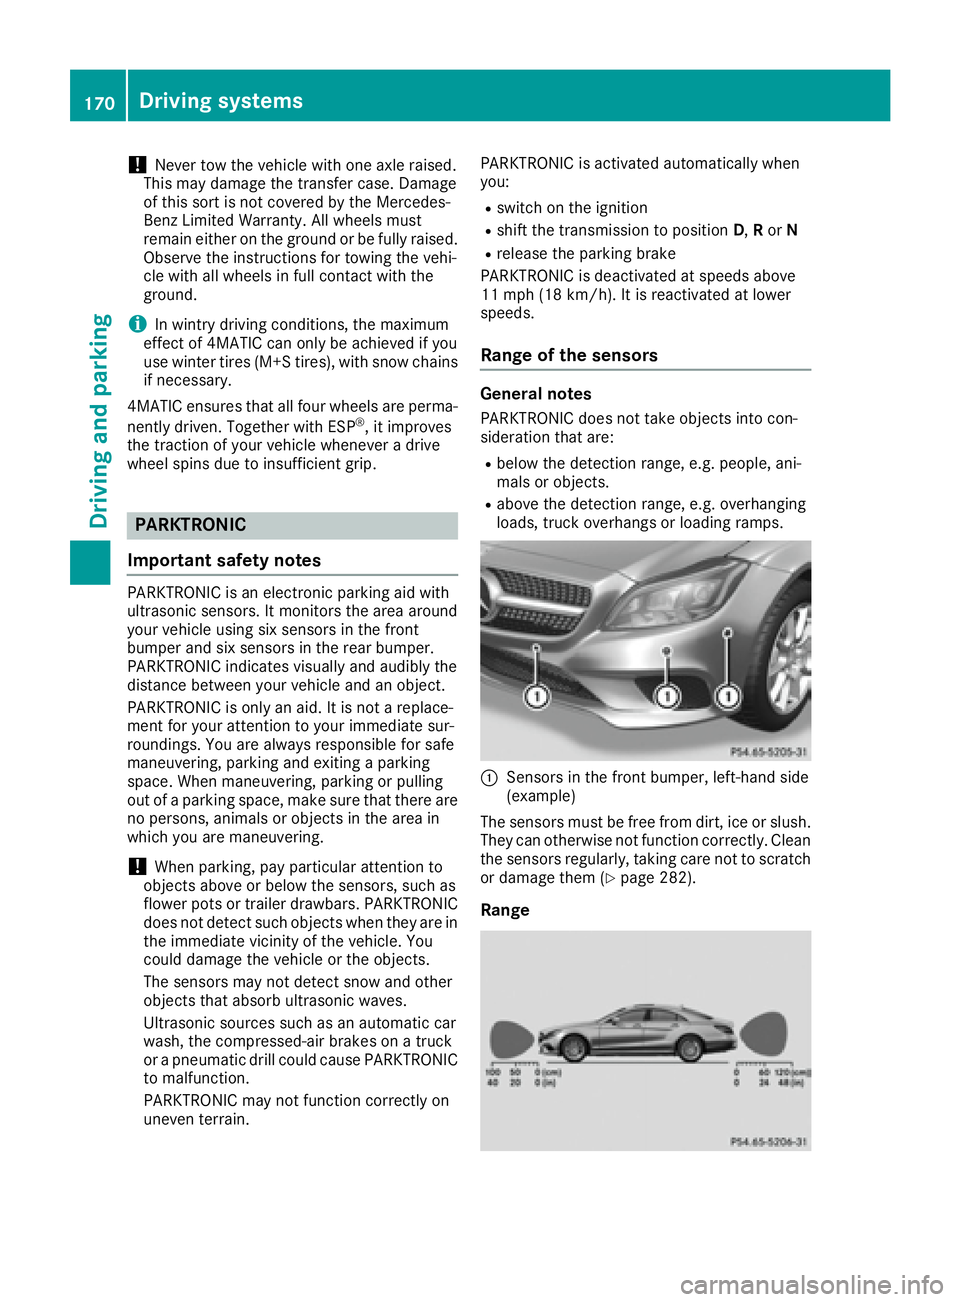 MERCEDES-BENZ CLS 2016  Owners Manual ! Never tow the vehicle with one axle raised.
This may damage the transfer case. Damage
of this sort is not covered by the Mercedes-
Benz Limited Warranty. All wheels must
remain either on the ground 